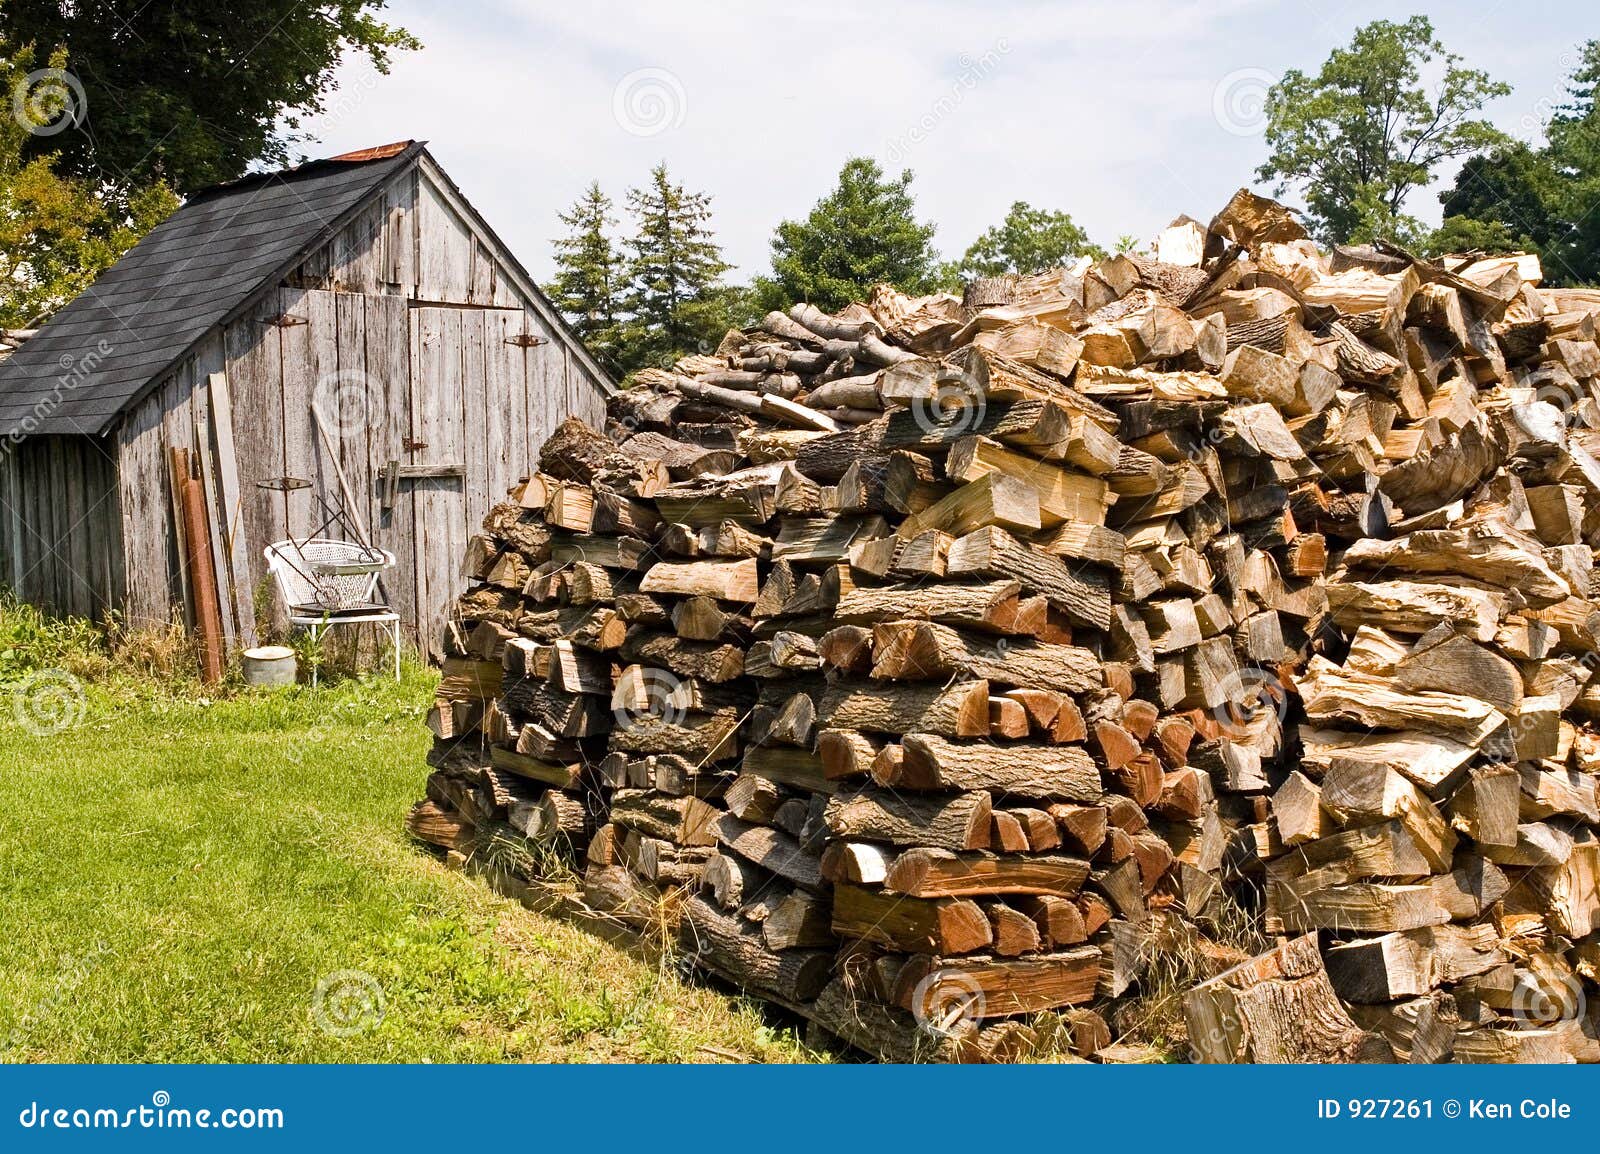 stacked pile of firewood stock image - image: 927261